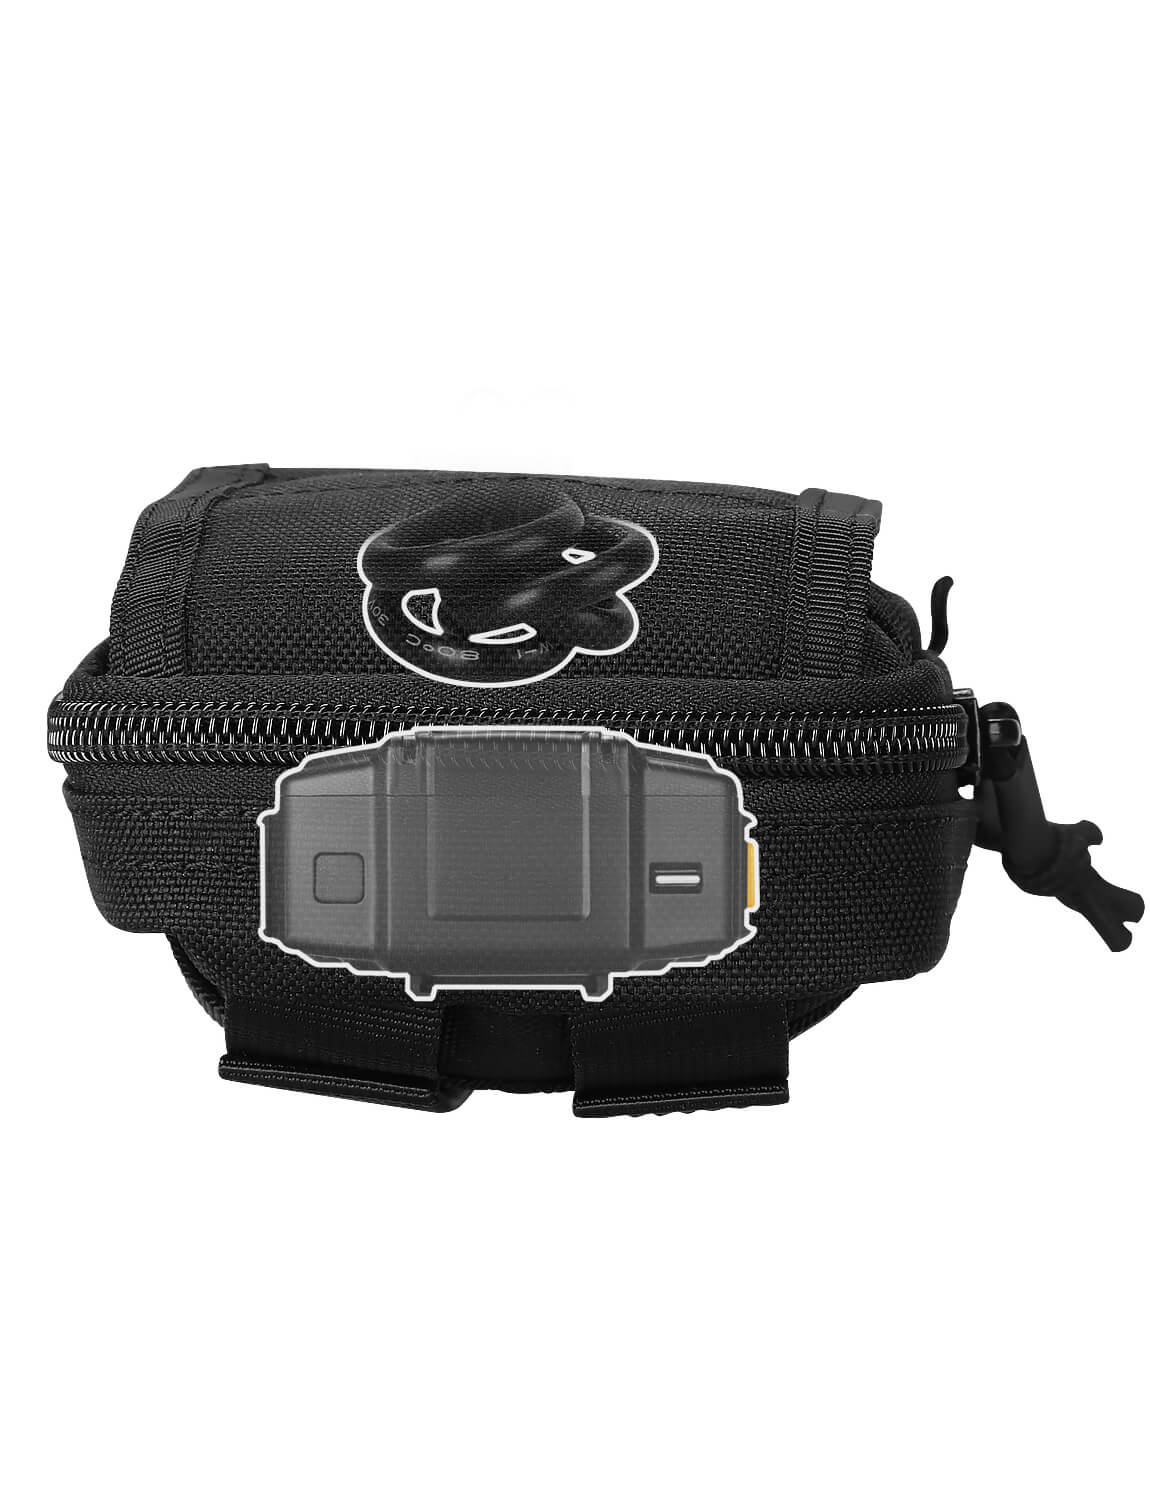 BOBLOV Body Camera Case Protection Pouch for All Brands of Body Cameras in Black0